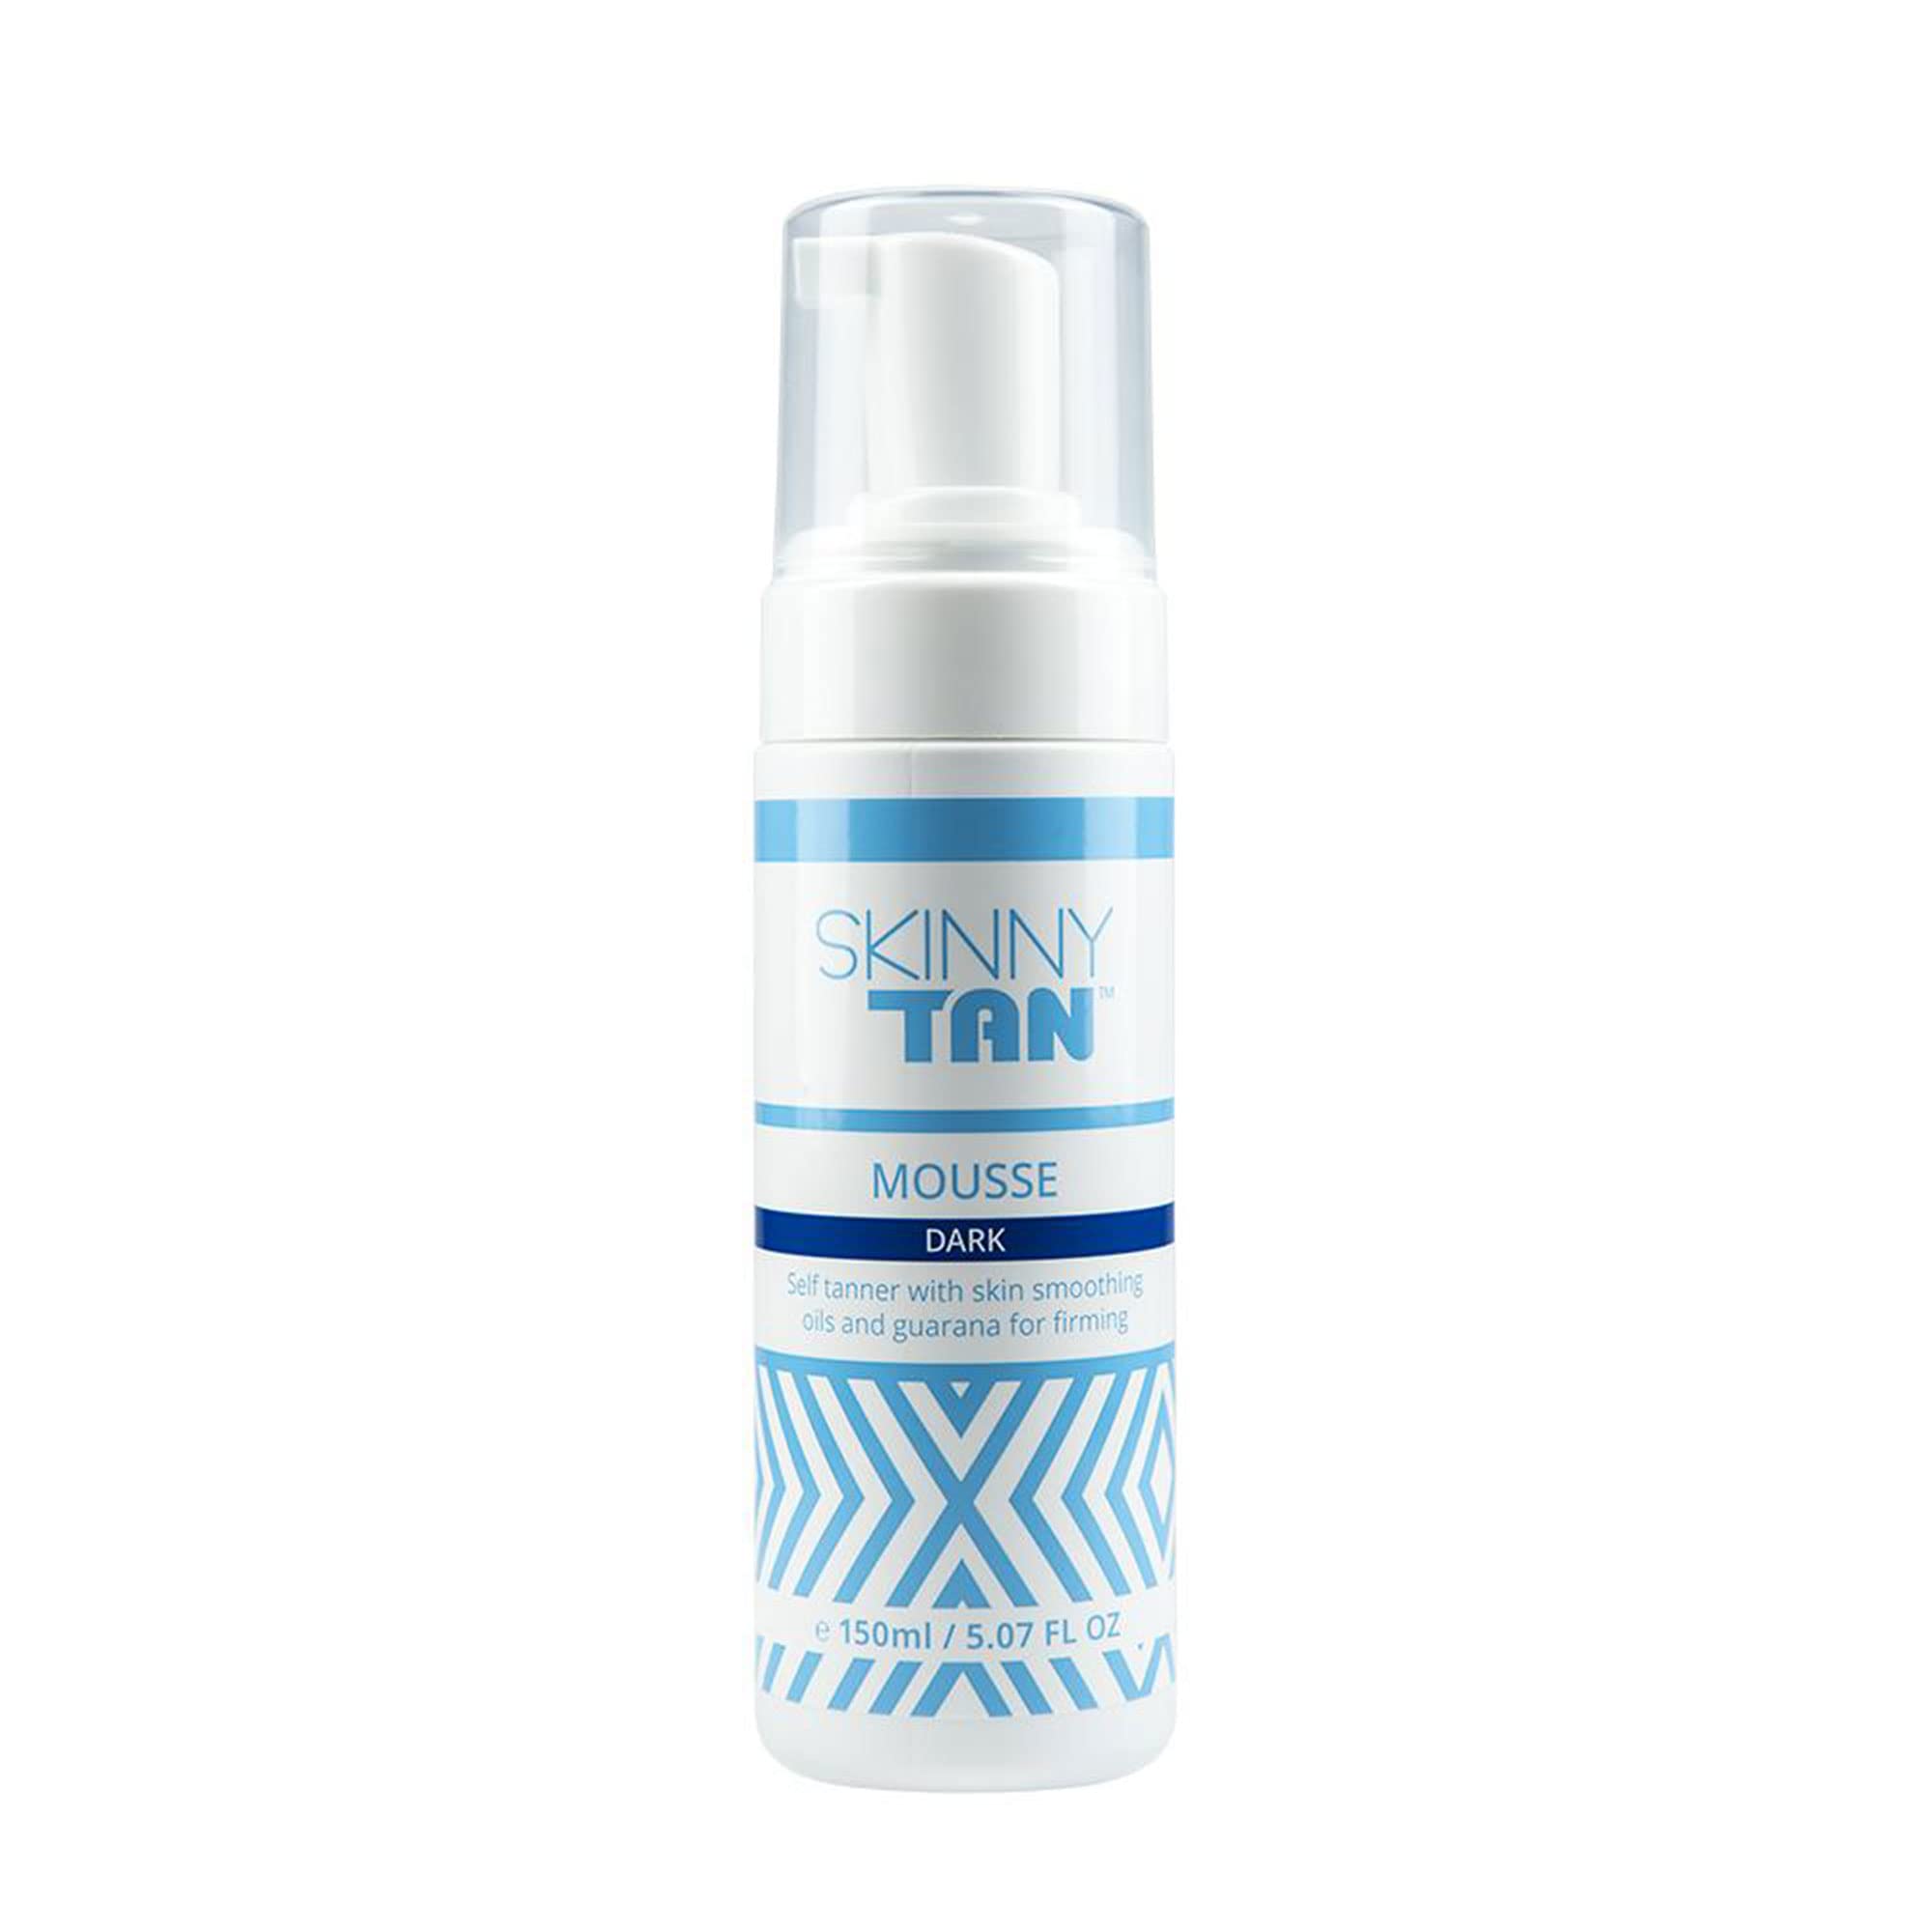 Skinny Tan Mousse - Long-Lasting and Non-Drying Formula - Delicious Coconut and Vanilla Scent - Easy To Apply, Luxurious Foam Texture - Streak Free and Natural Looking Results - Dark - 5 oz Bronzer